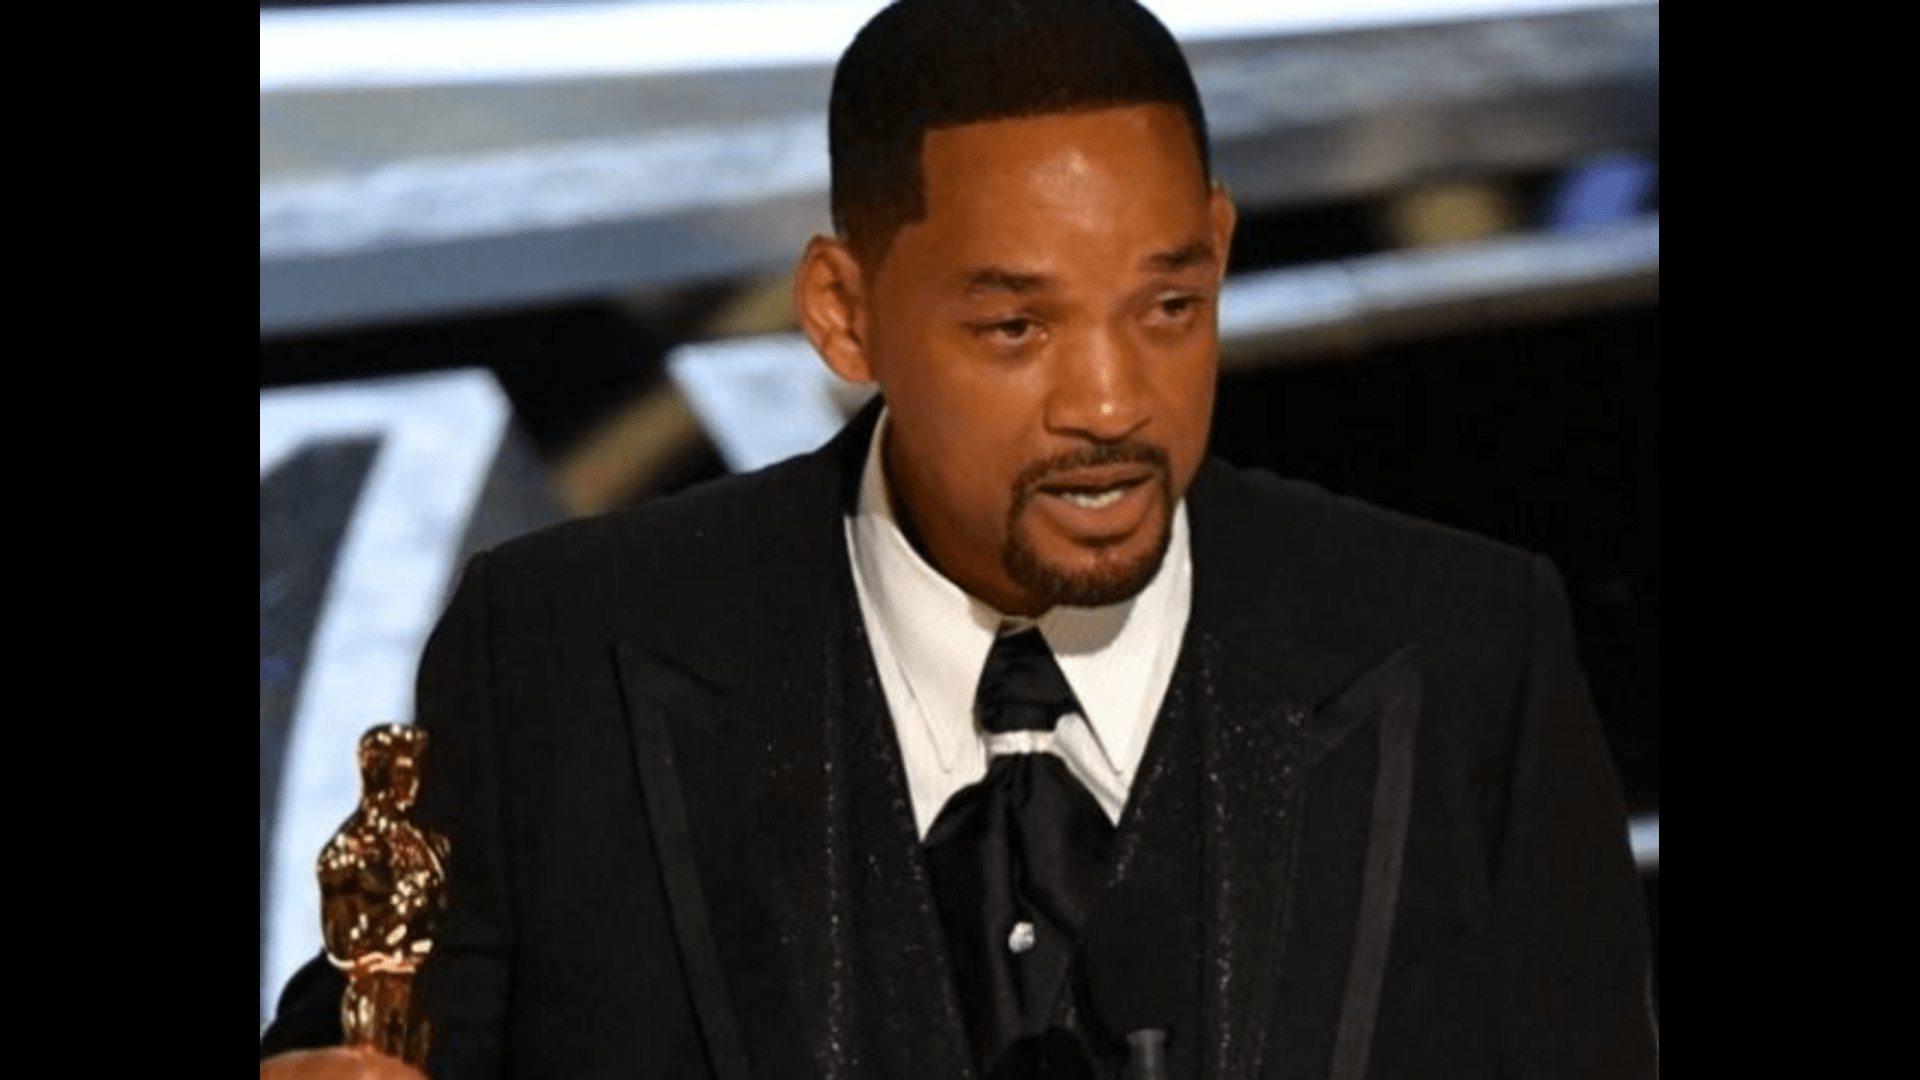 will-smith-resigns-from-the-academy-after-punching-chris-rock-at-the-oscars